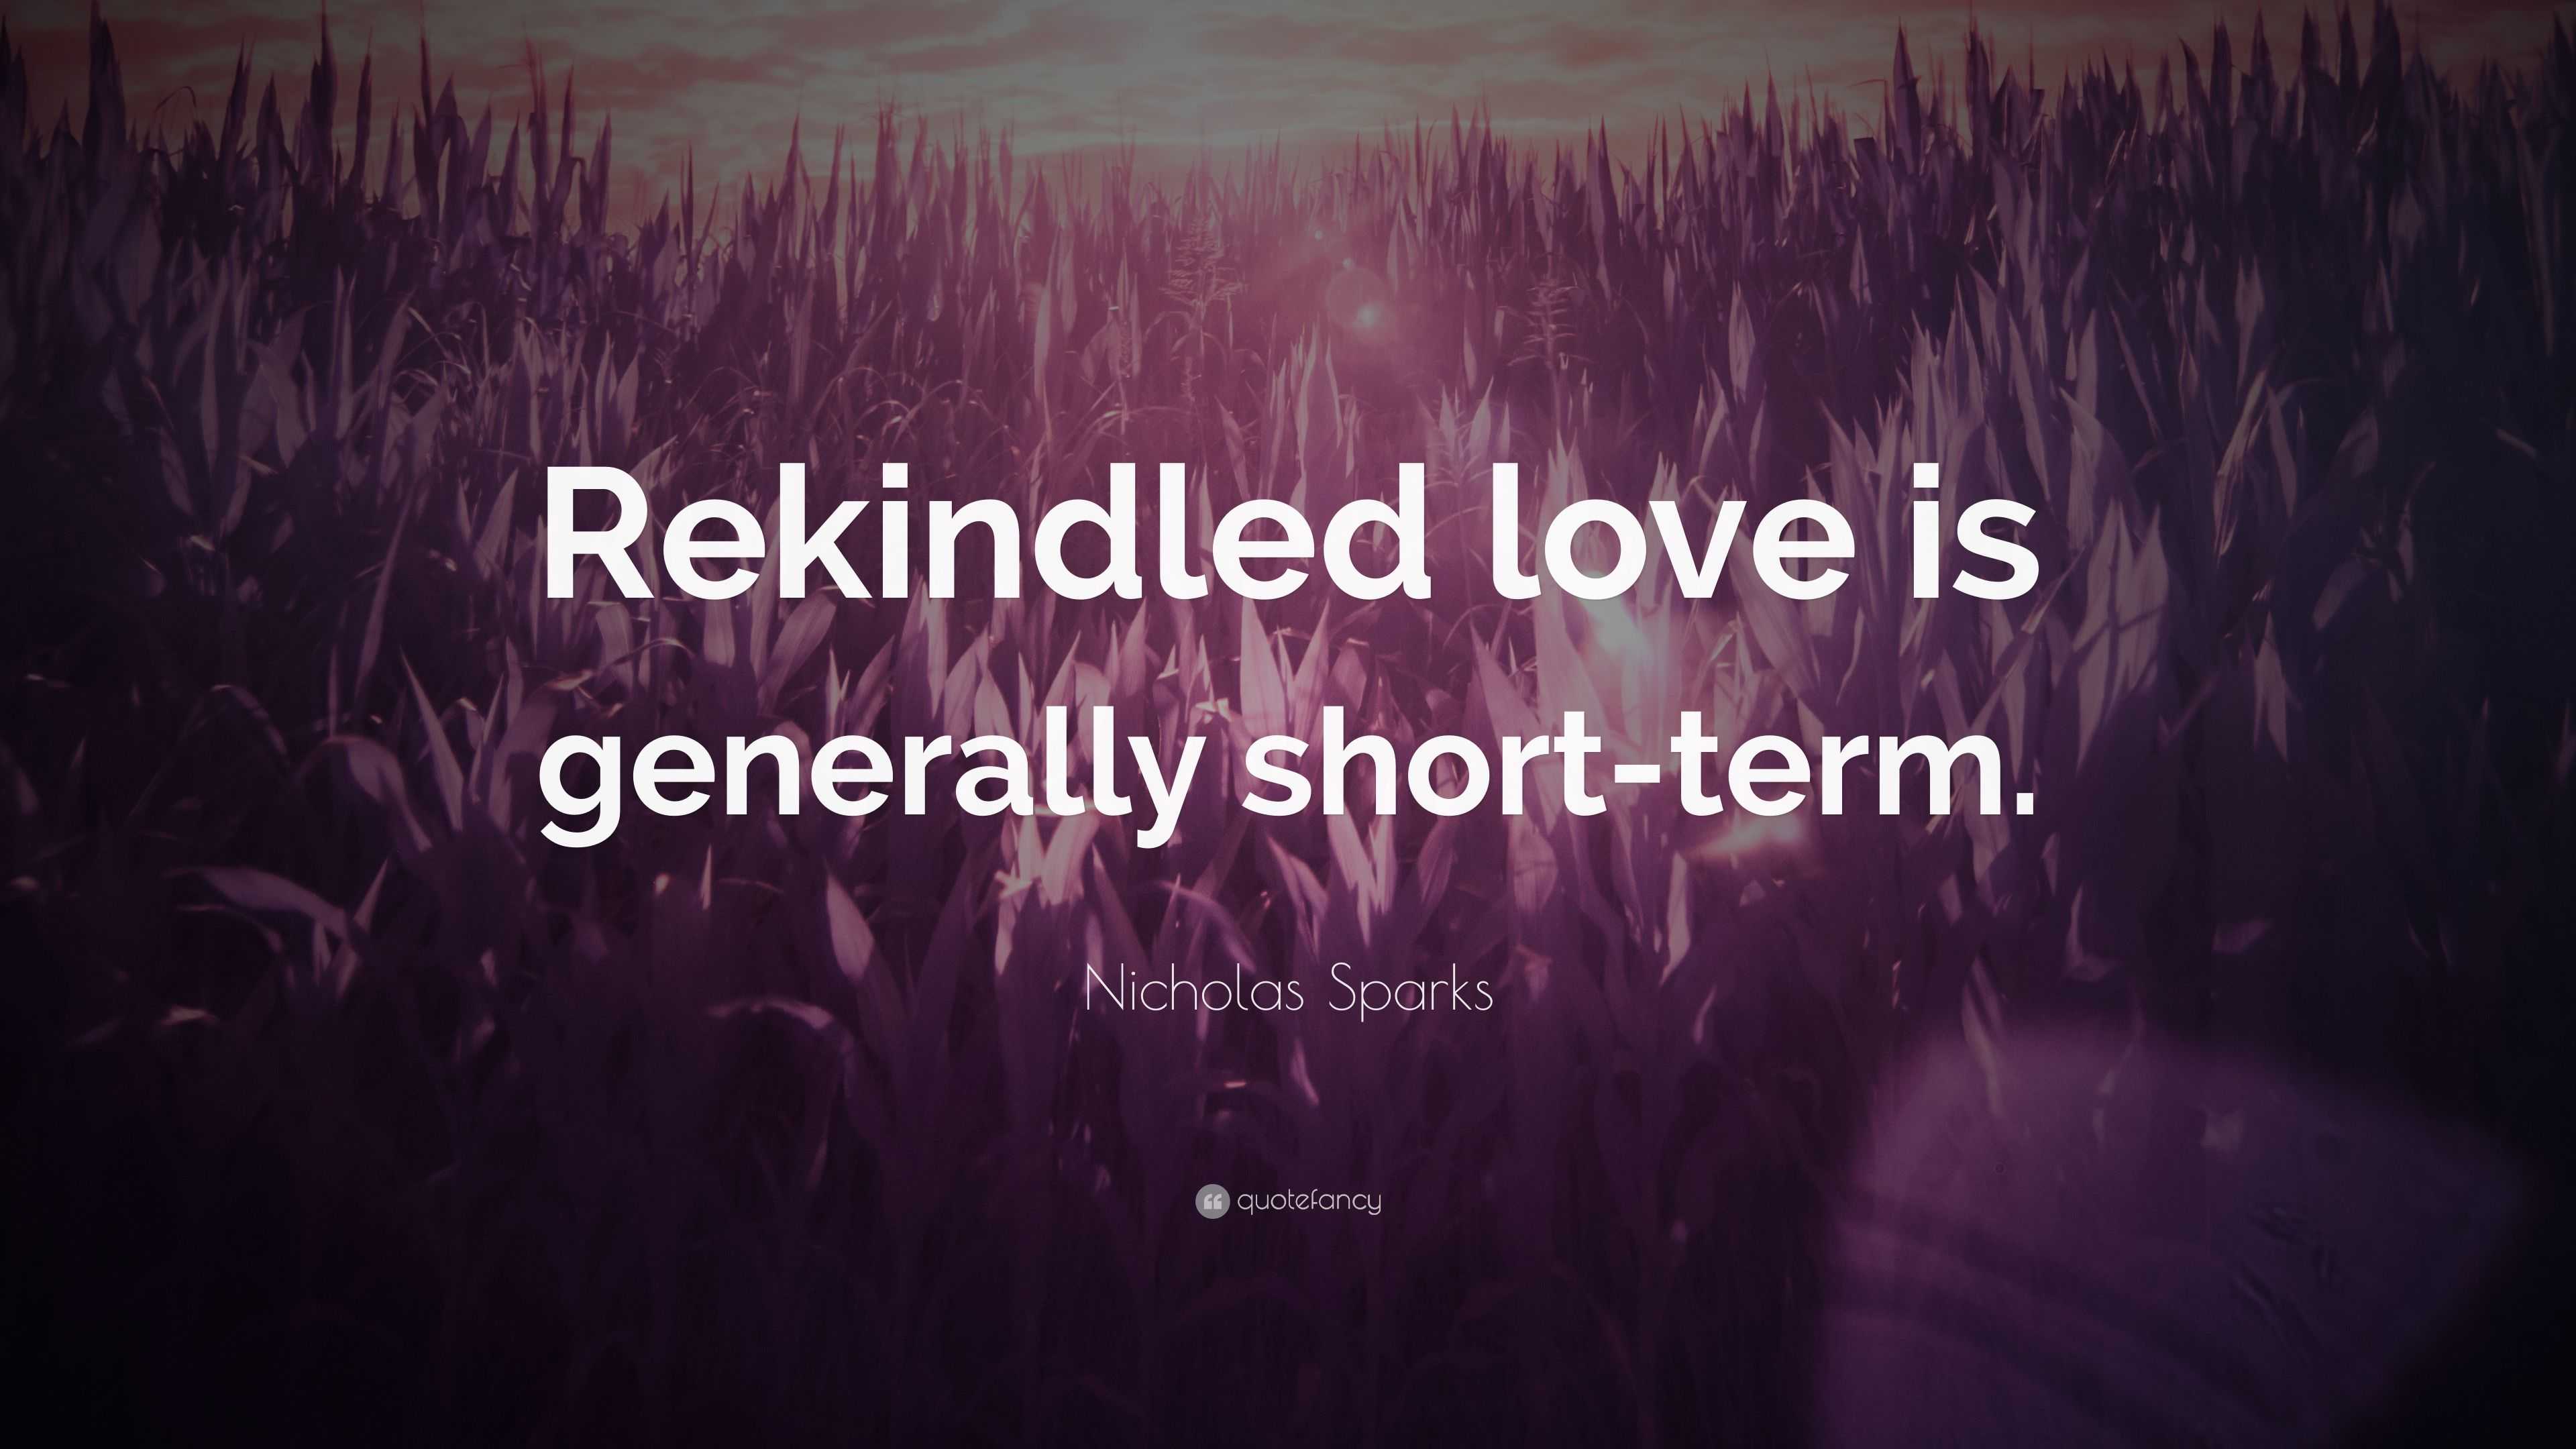 Nicholas Sparks Quote   Rekindled  love  is generally short 